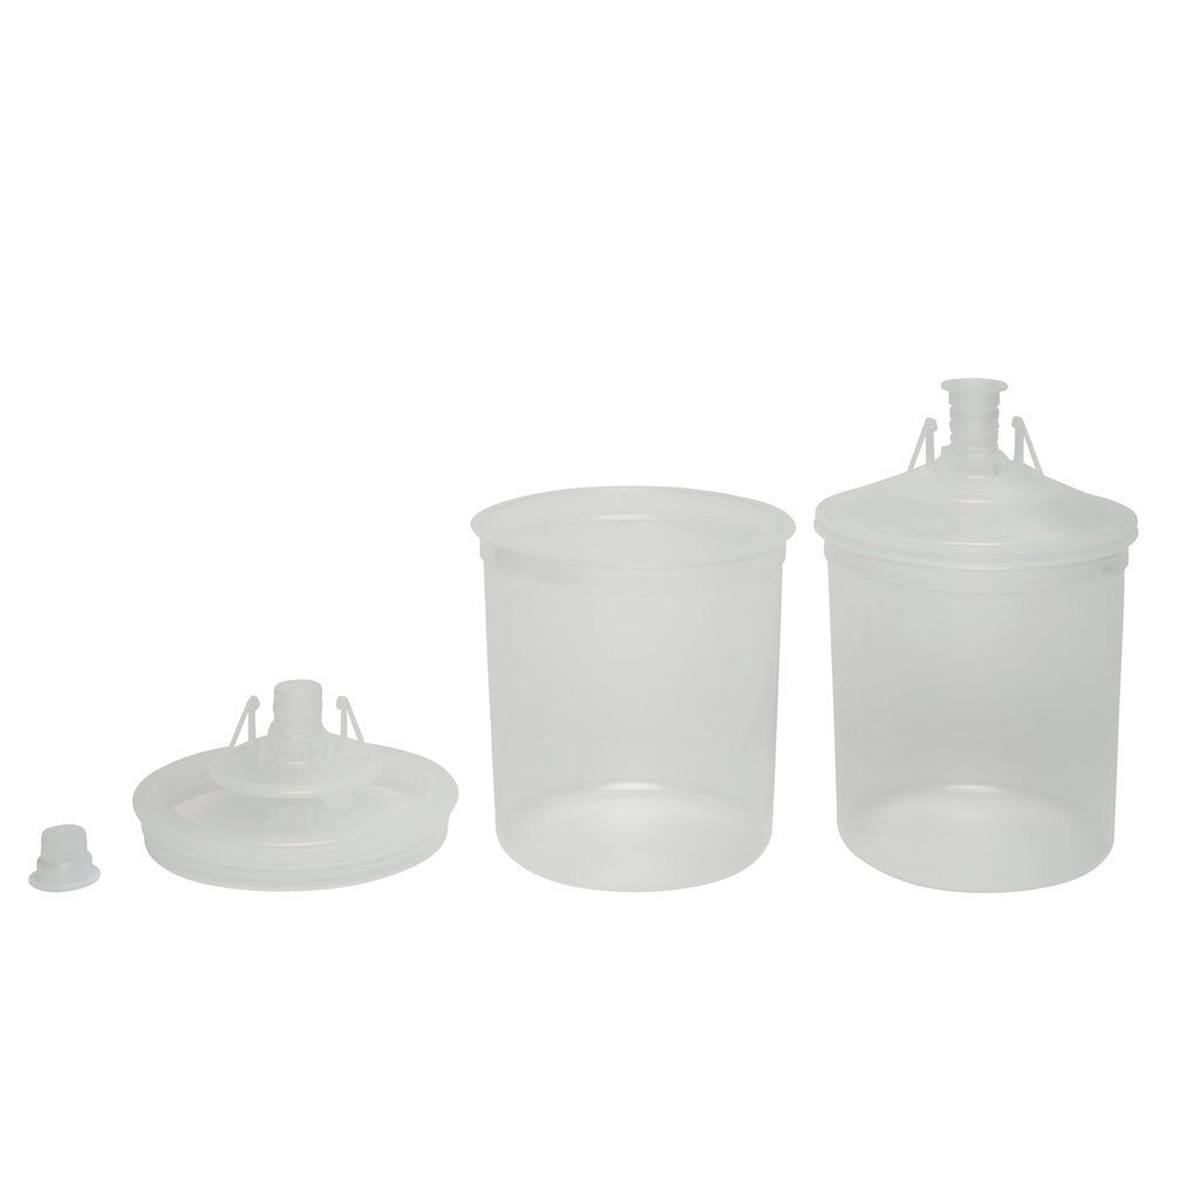 3M PPS Kit filter 125my, 50 bags &amp; 50 lids incl. filter &amp; 20 storage caps 0.65l #E16026